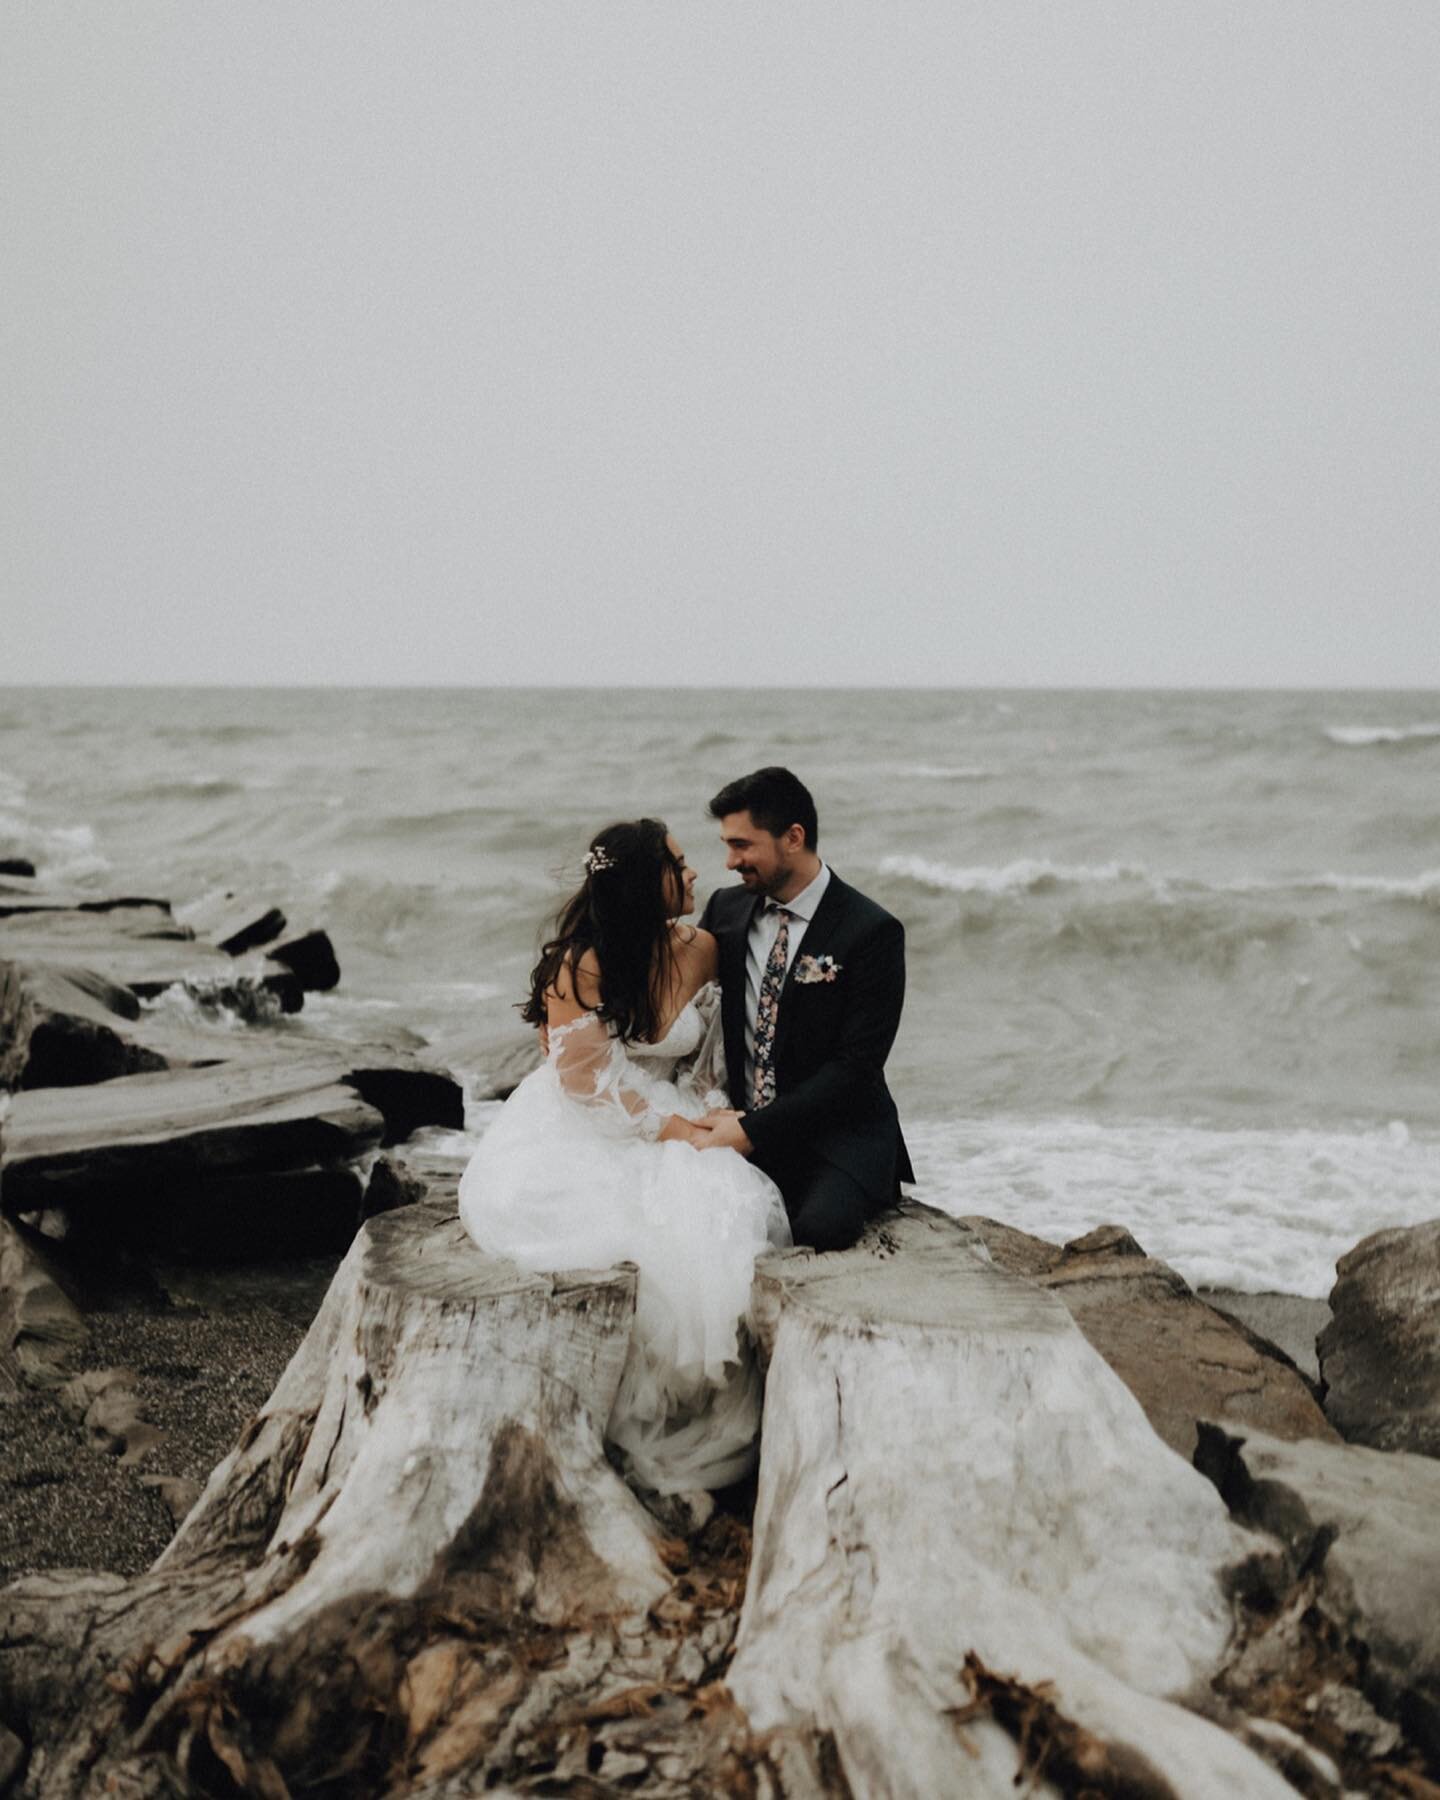 Dark skies, storming weather, high winds and heavy rain, today was a day to remember! I want my brides and grooms to know that no matter what Mother Nature has for us, I have your backs. Trust in the process but most importantly trust in me to turn a